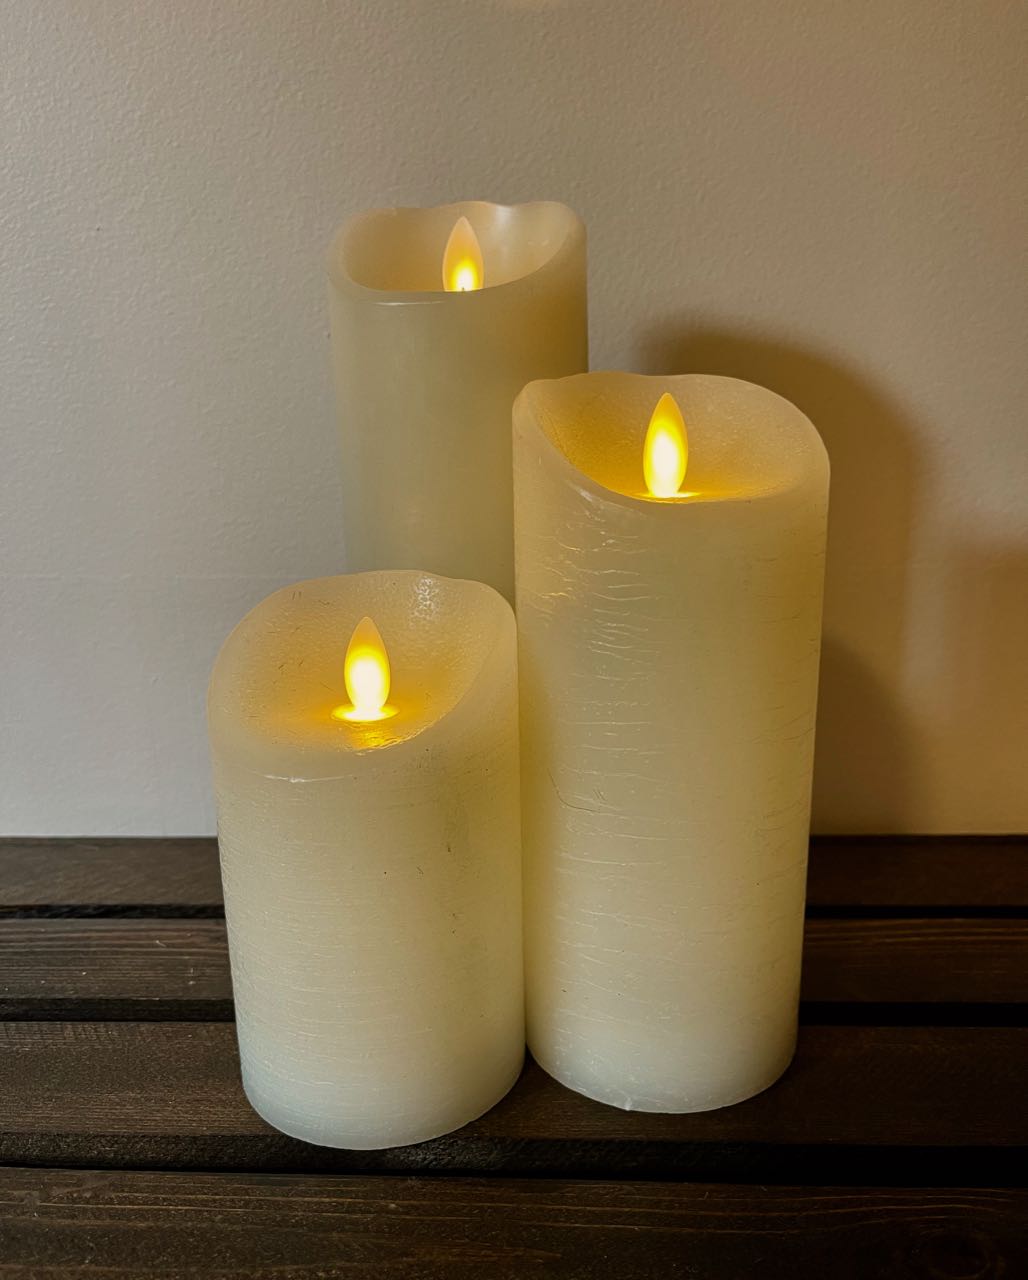 Rent A rose- trio of cream LED pillar candles of three different heights